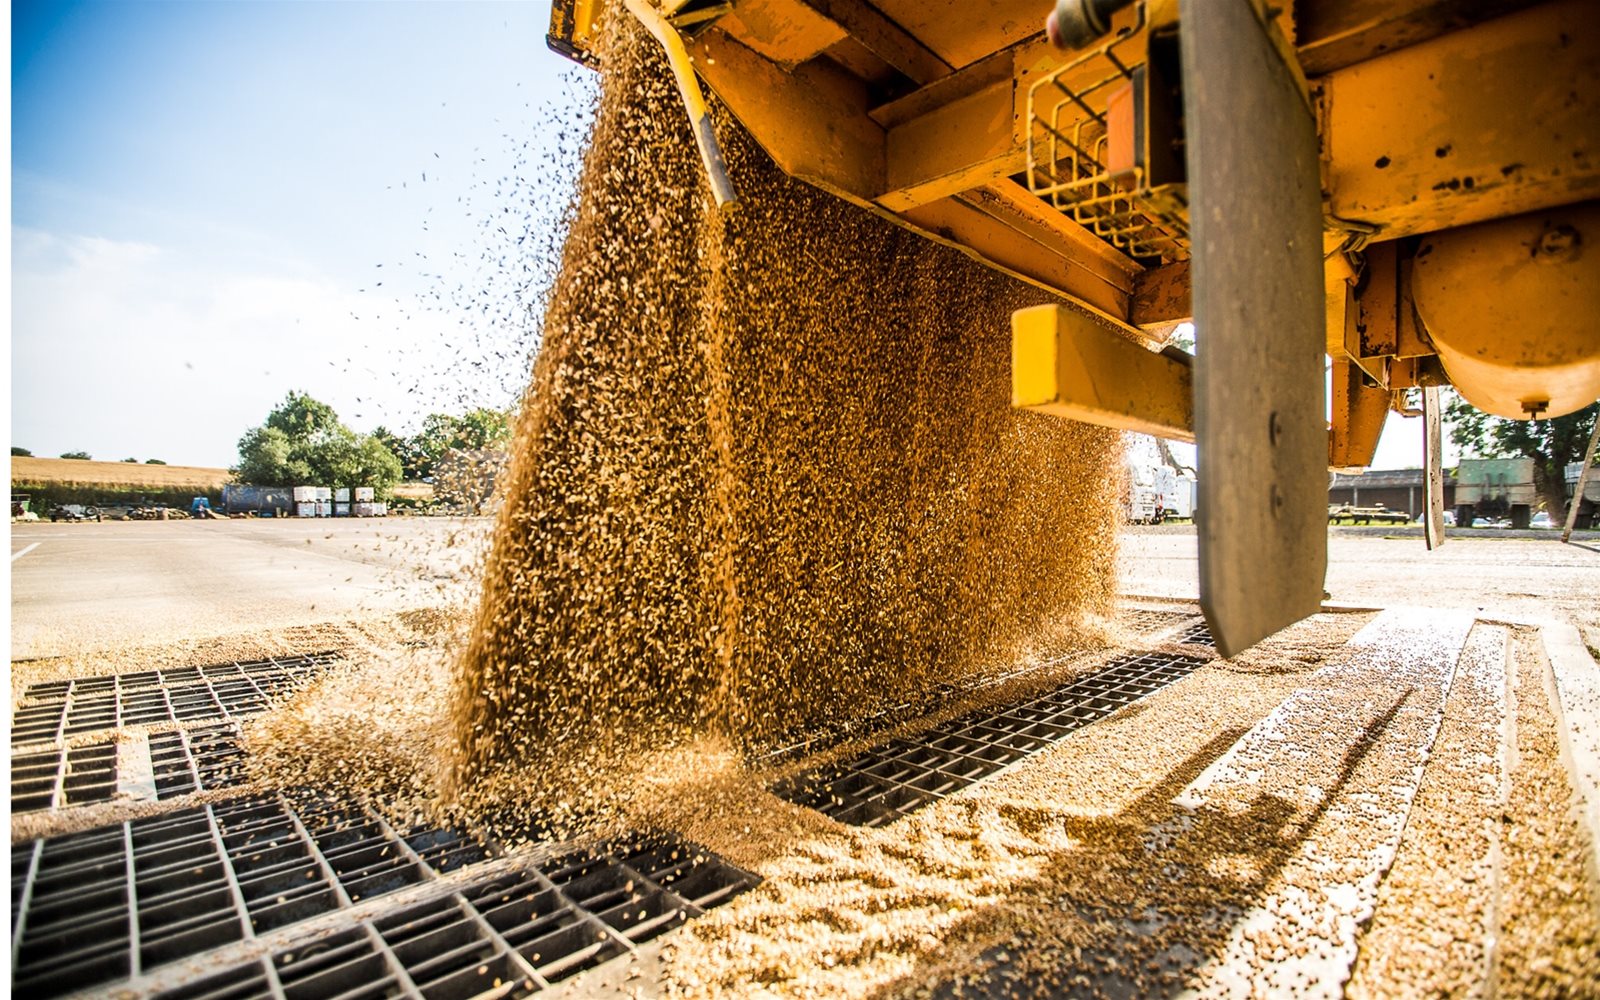 Wheat being tipped into grain store